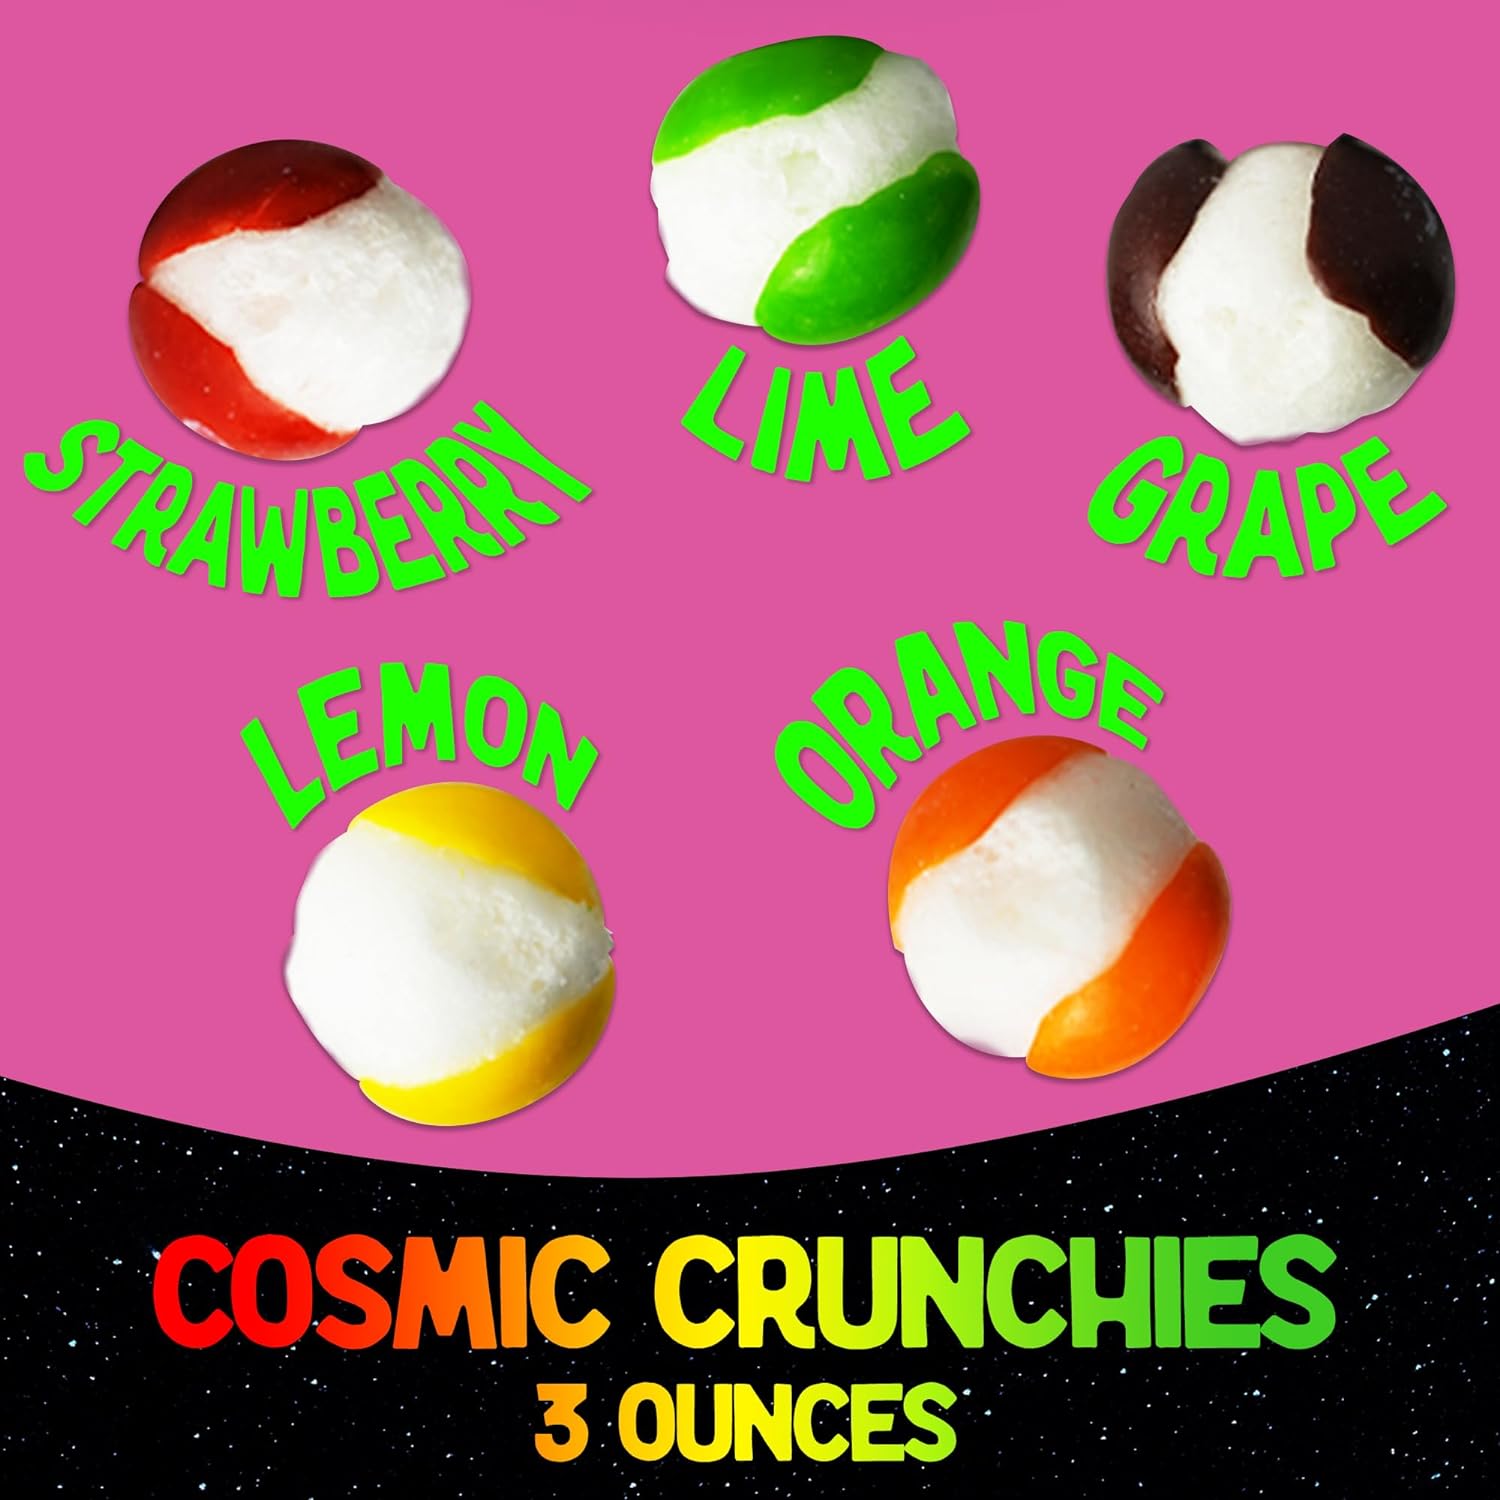 2 Pack Freeze Dried Cosmic Crunchies and Hi Chews Candy